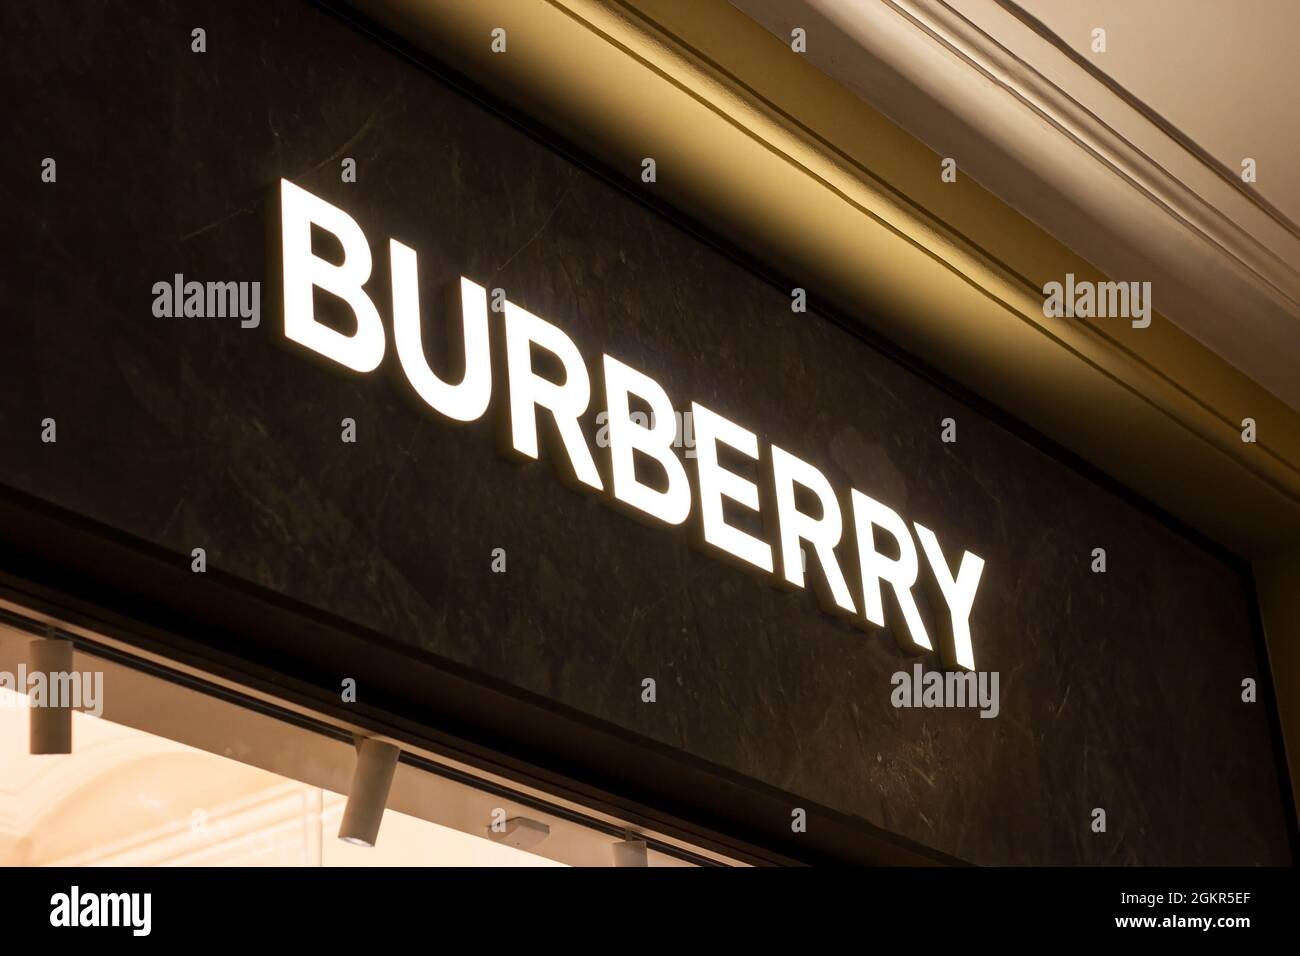 MOSCOW, RUSSIA - AUGUST 10, 2021: Burberry brand retail shop logo singboard  on the storefront in the shopping mall Stock Photo - Alamy